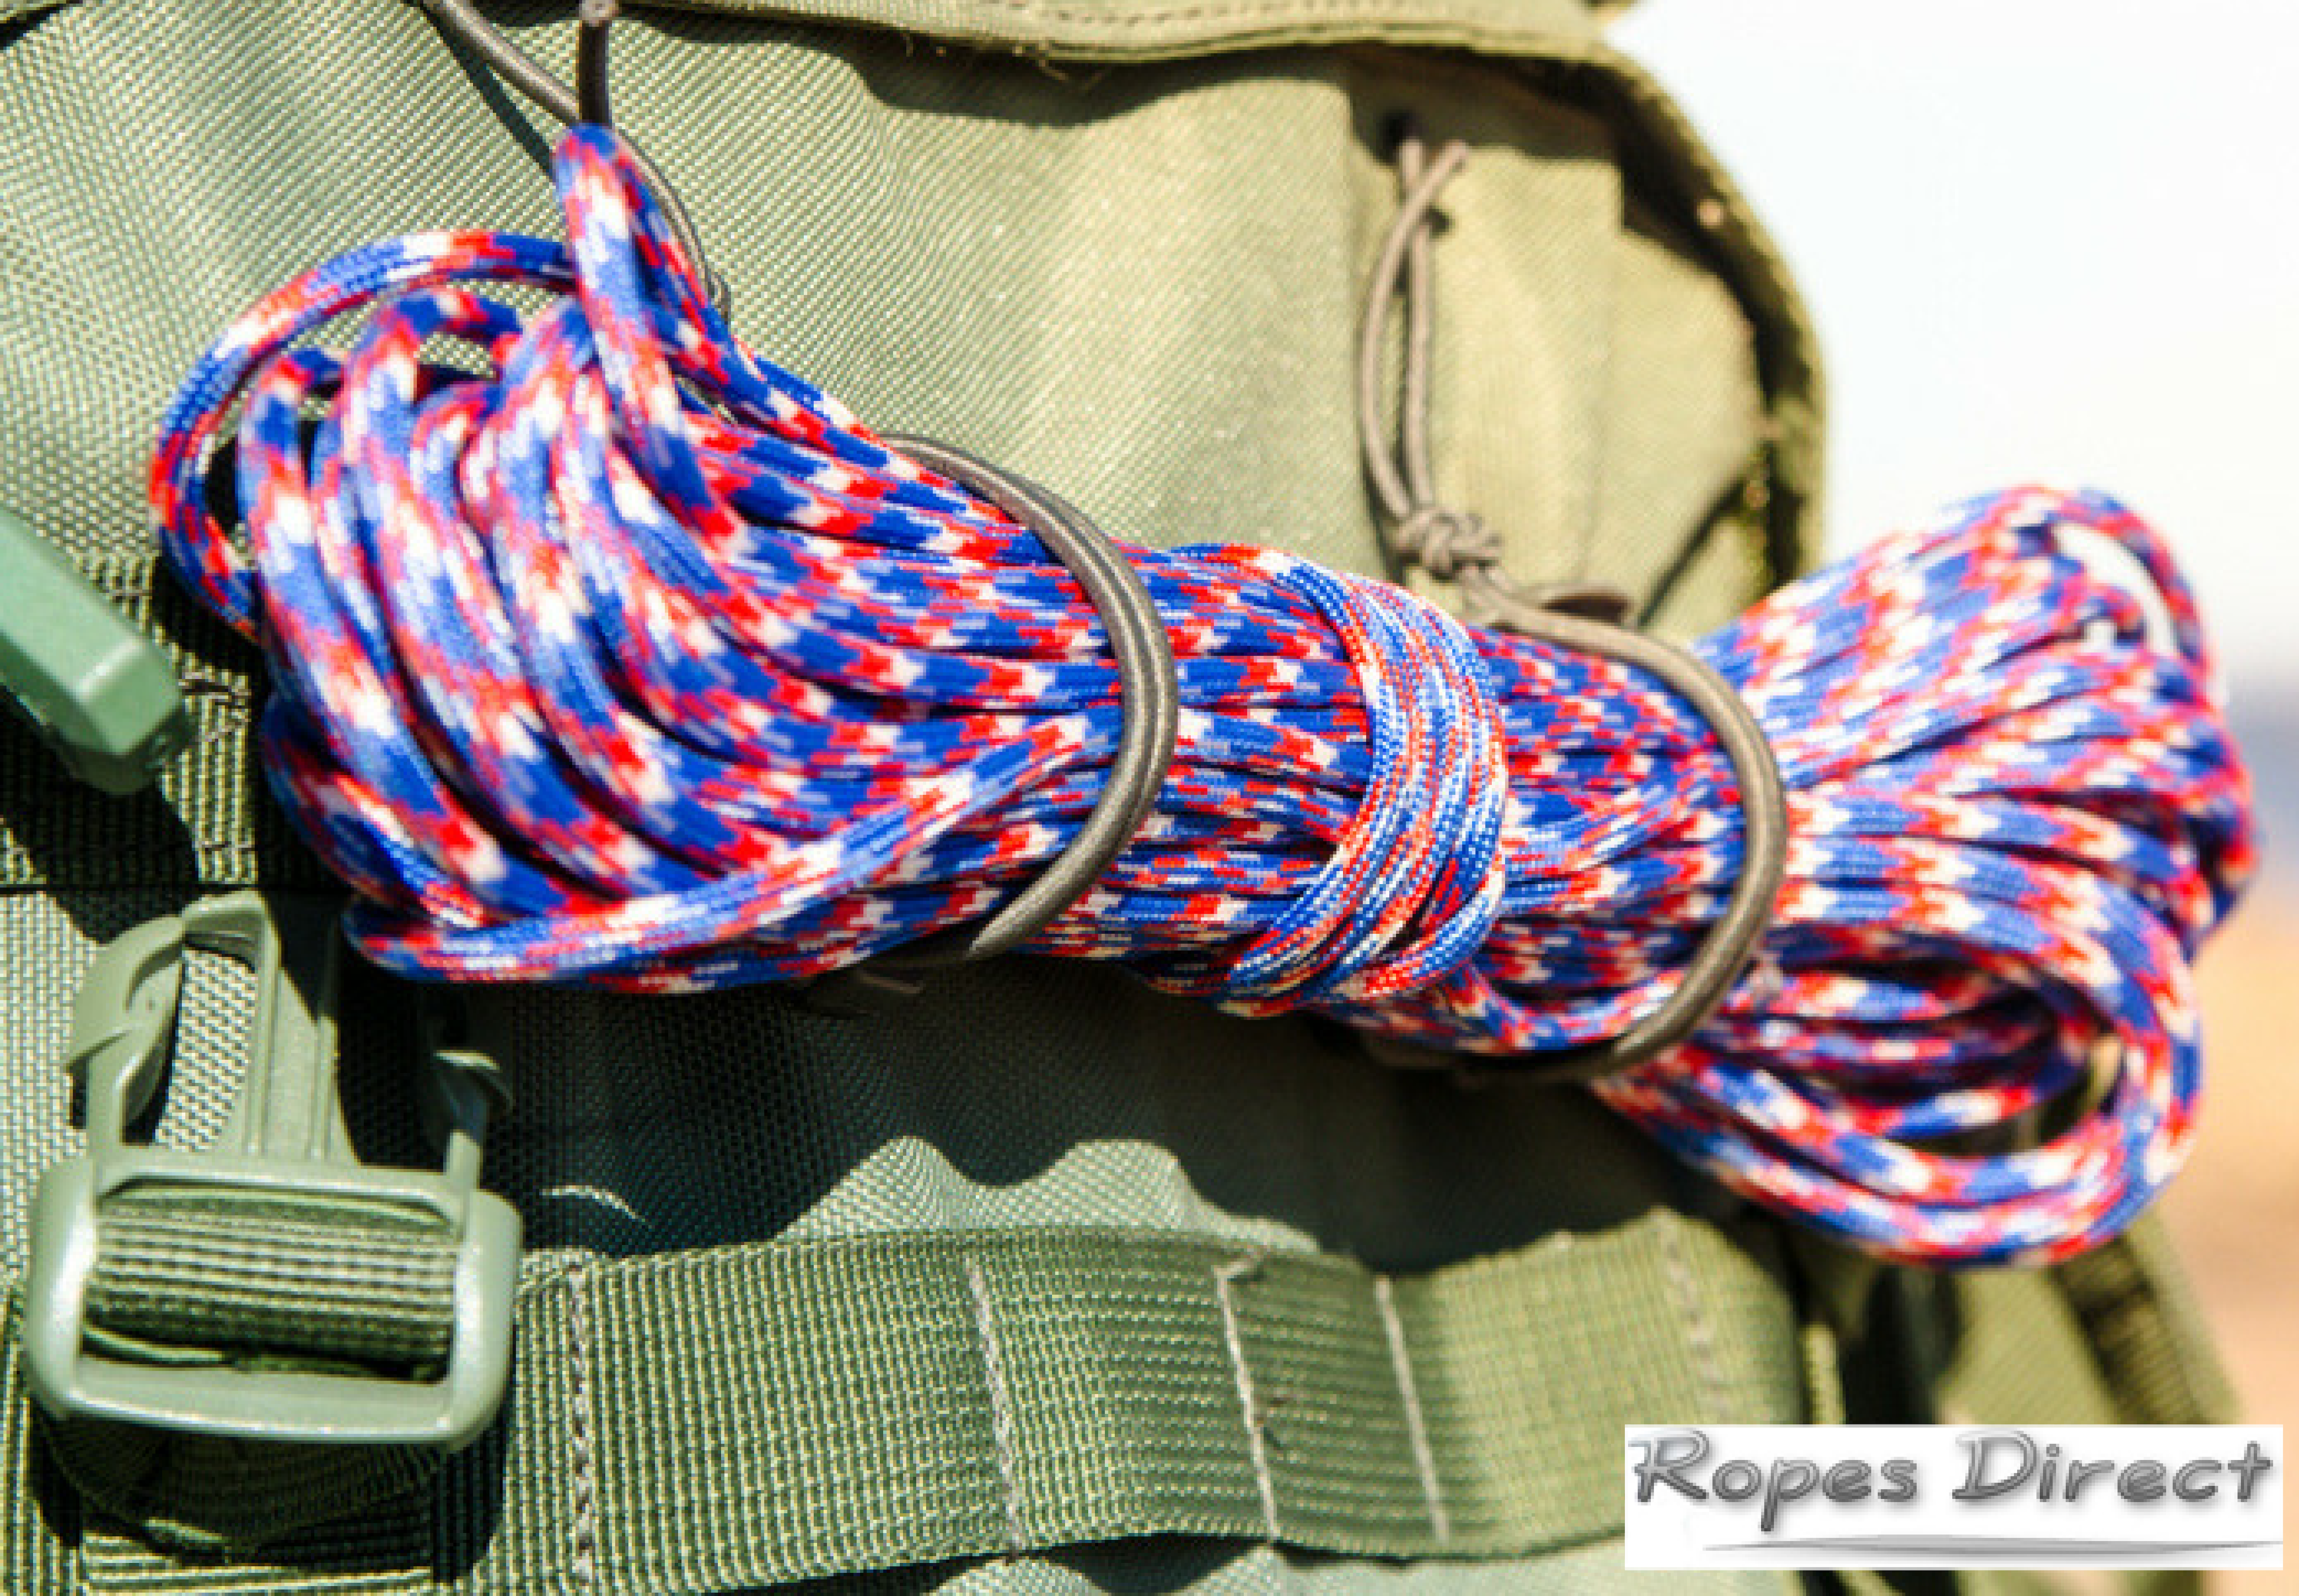 Camper with paracord strapped to their backpack